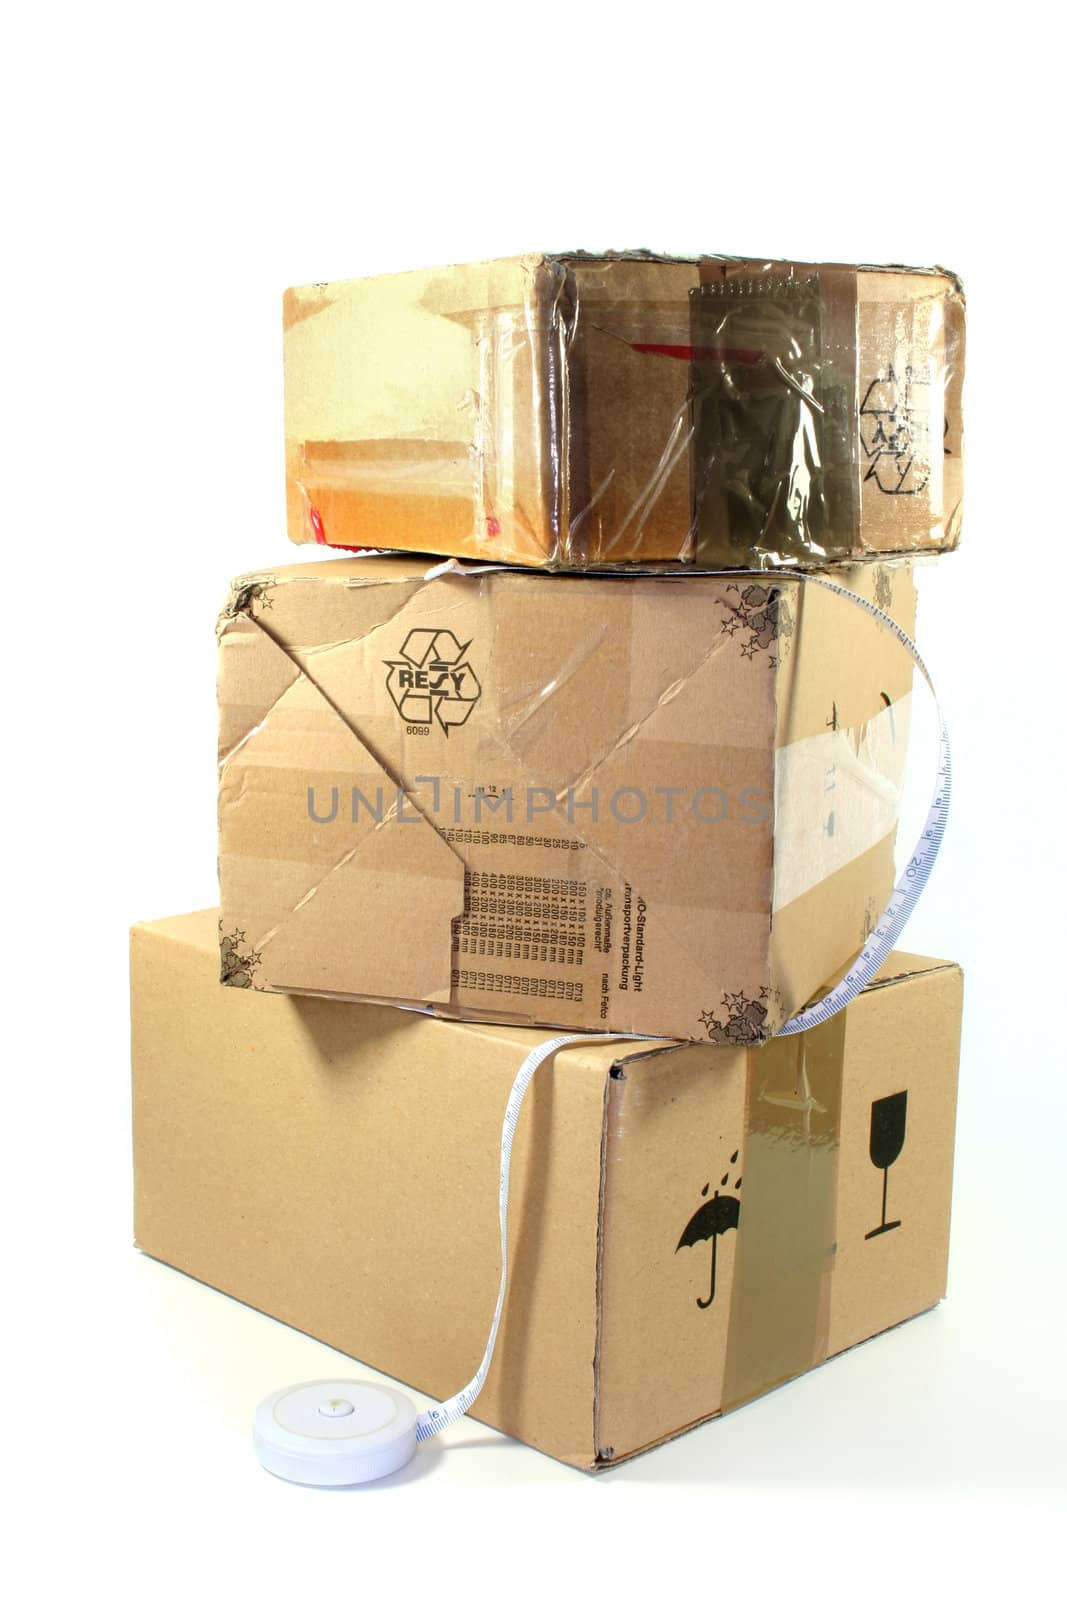 three boxes stacked on a white background